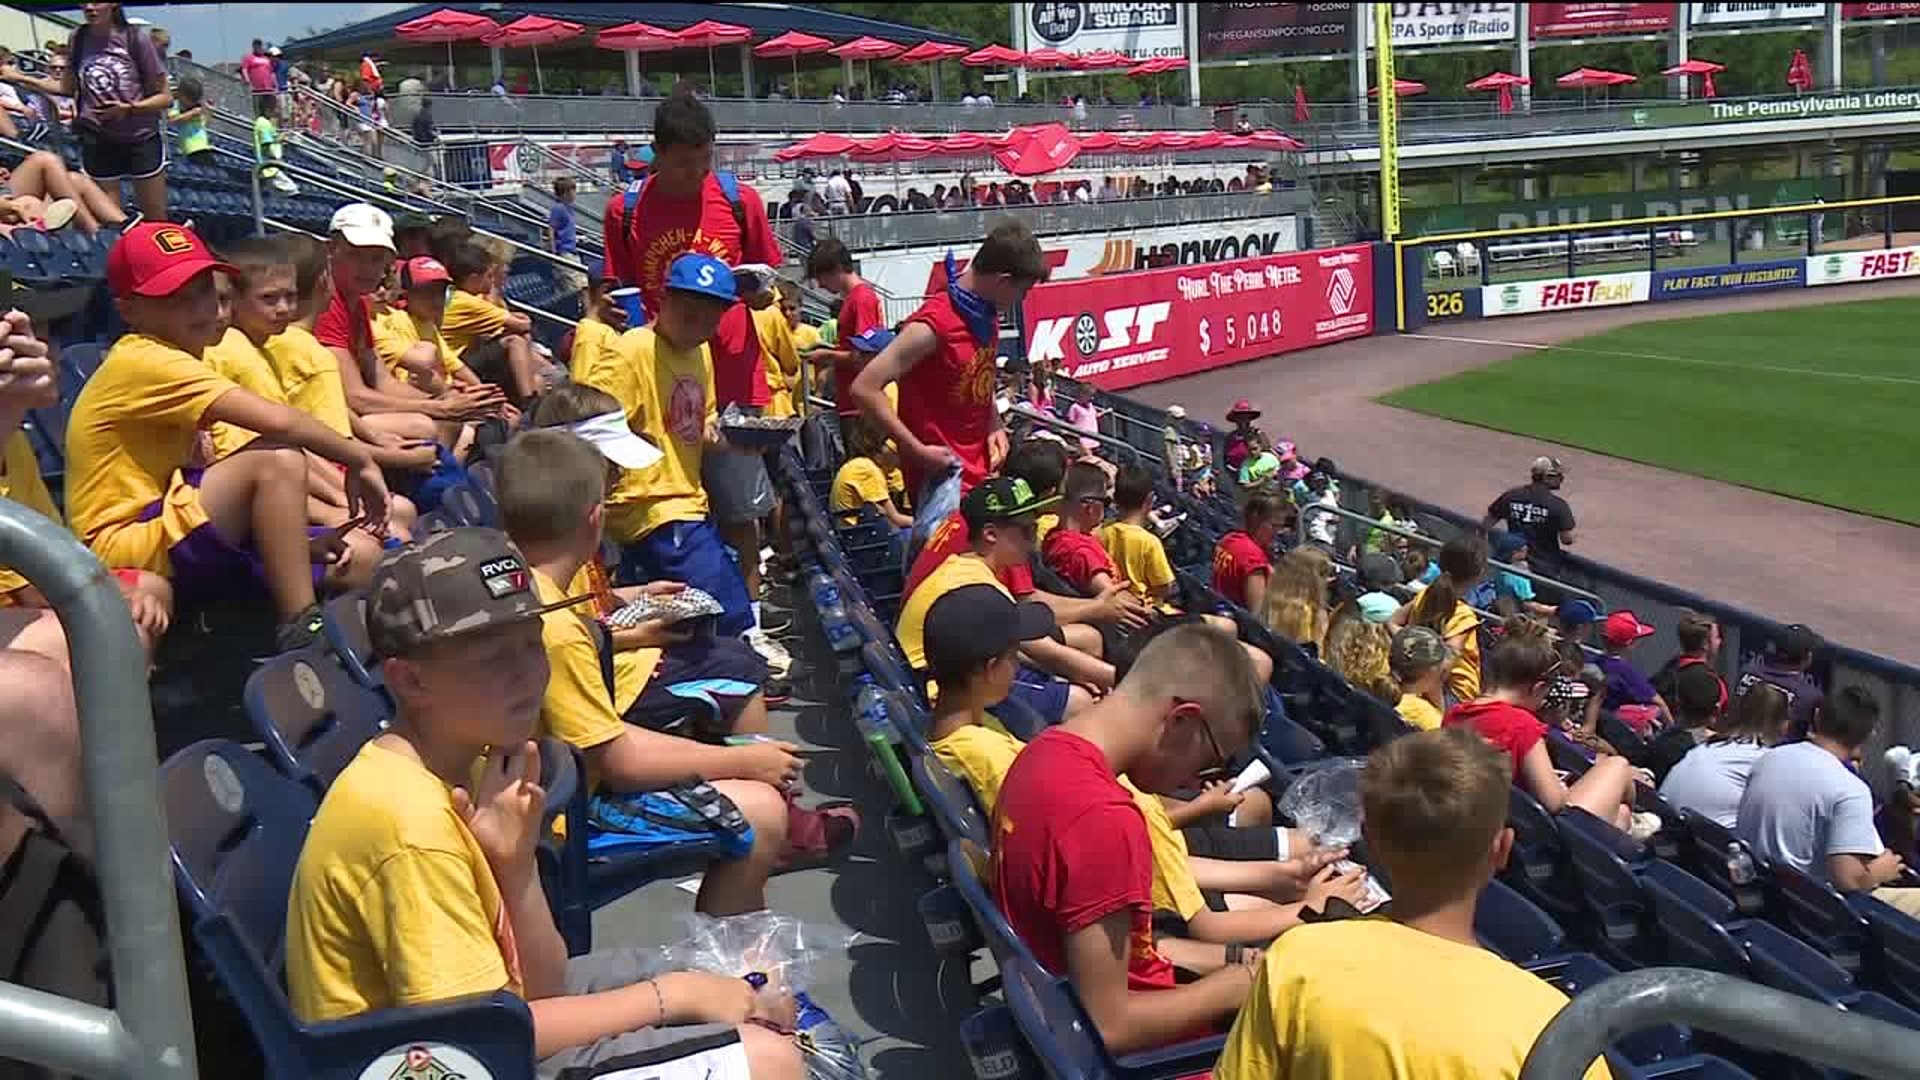 Fans Enjoy Sunny RailRiders Afternoon Game